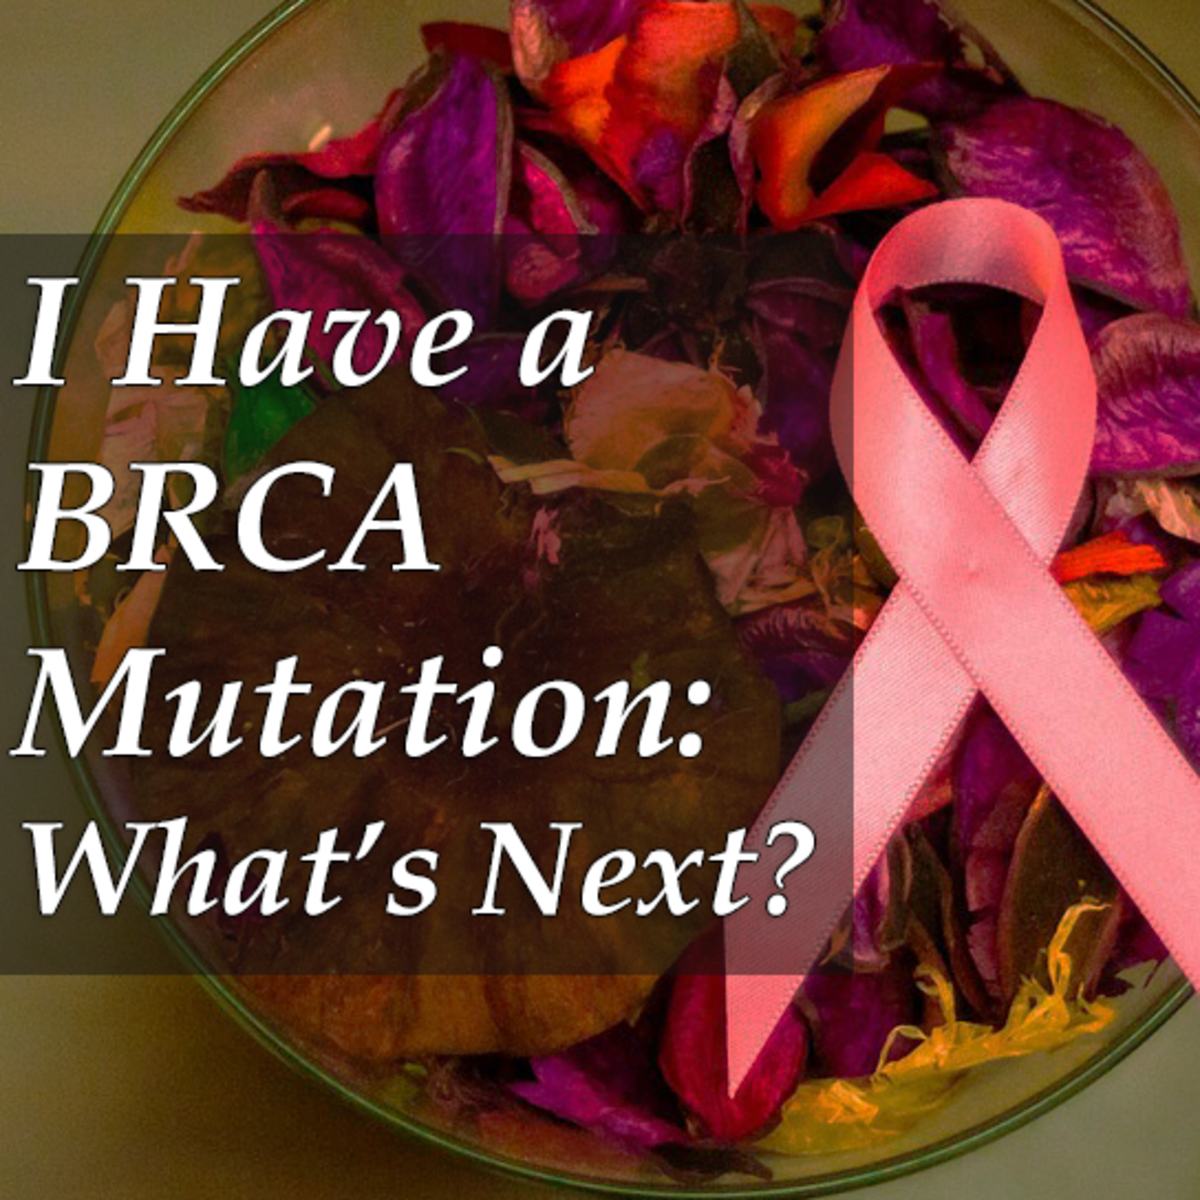 I Have a BRCA Mutation: What’s Next?